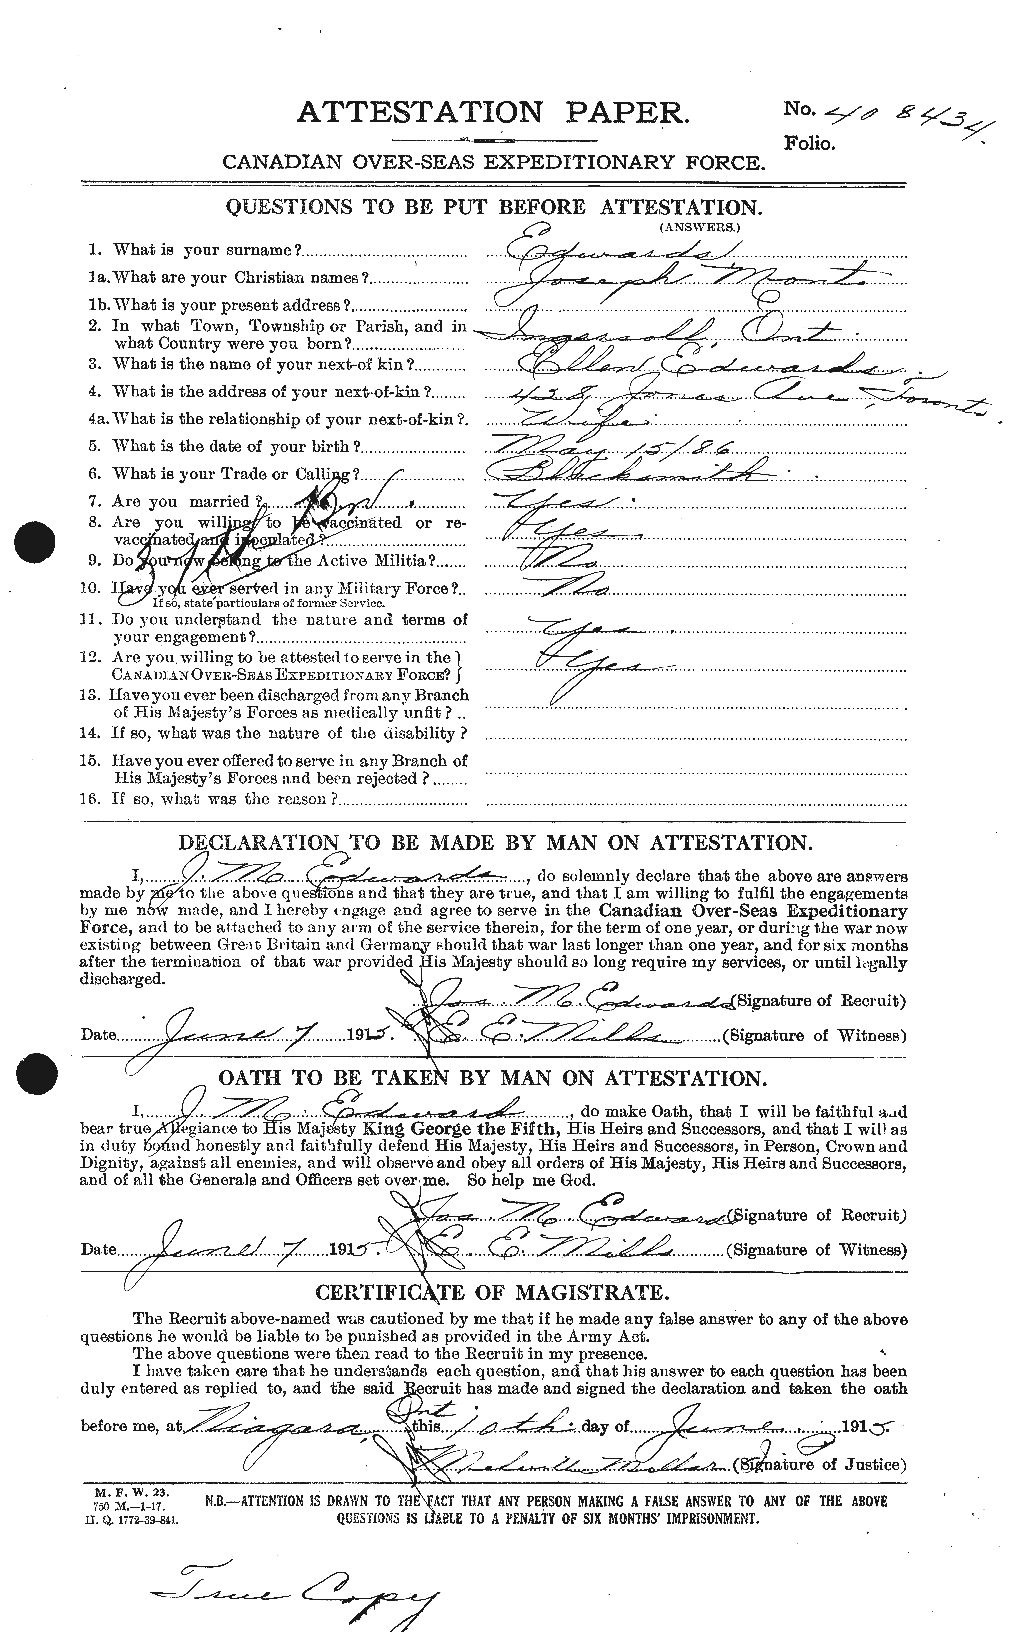 Personnel Records of the First World War - CEF 310183a